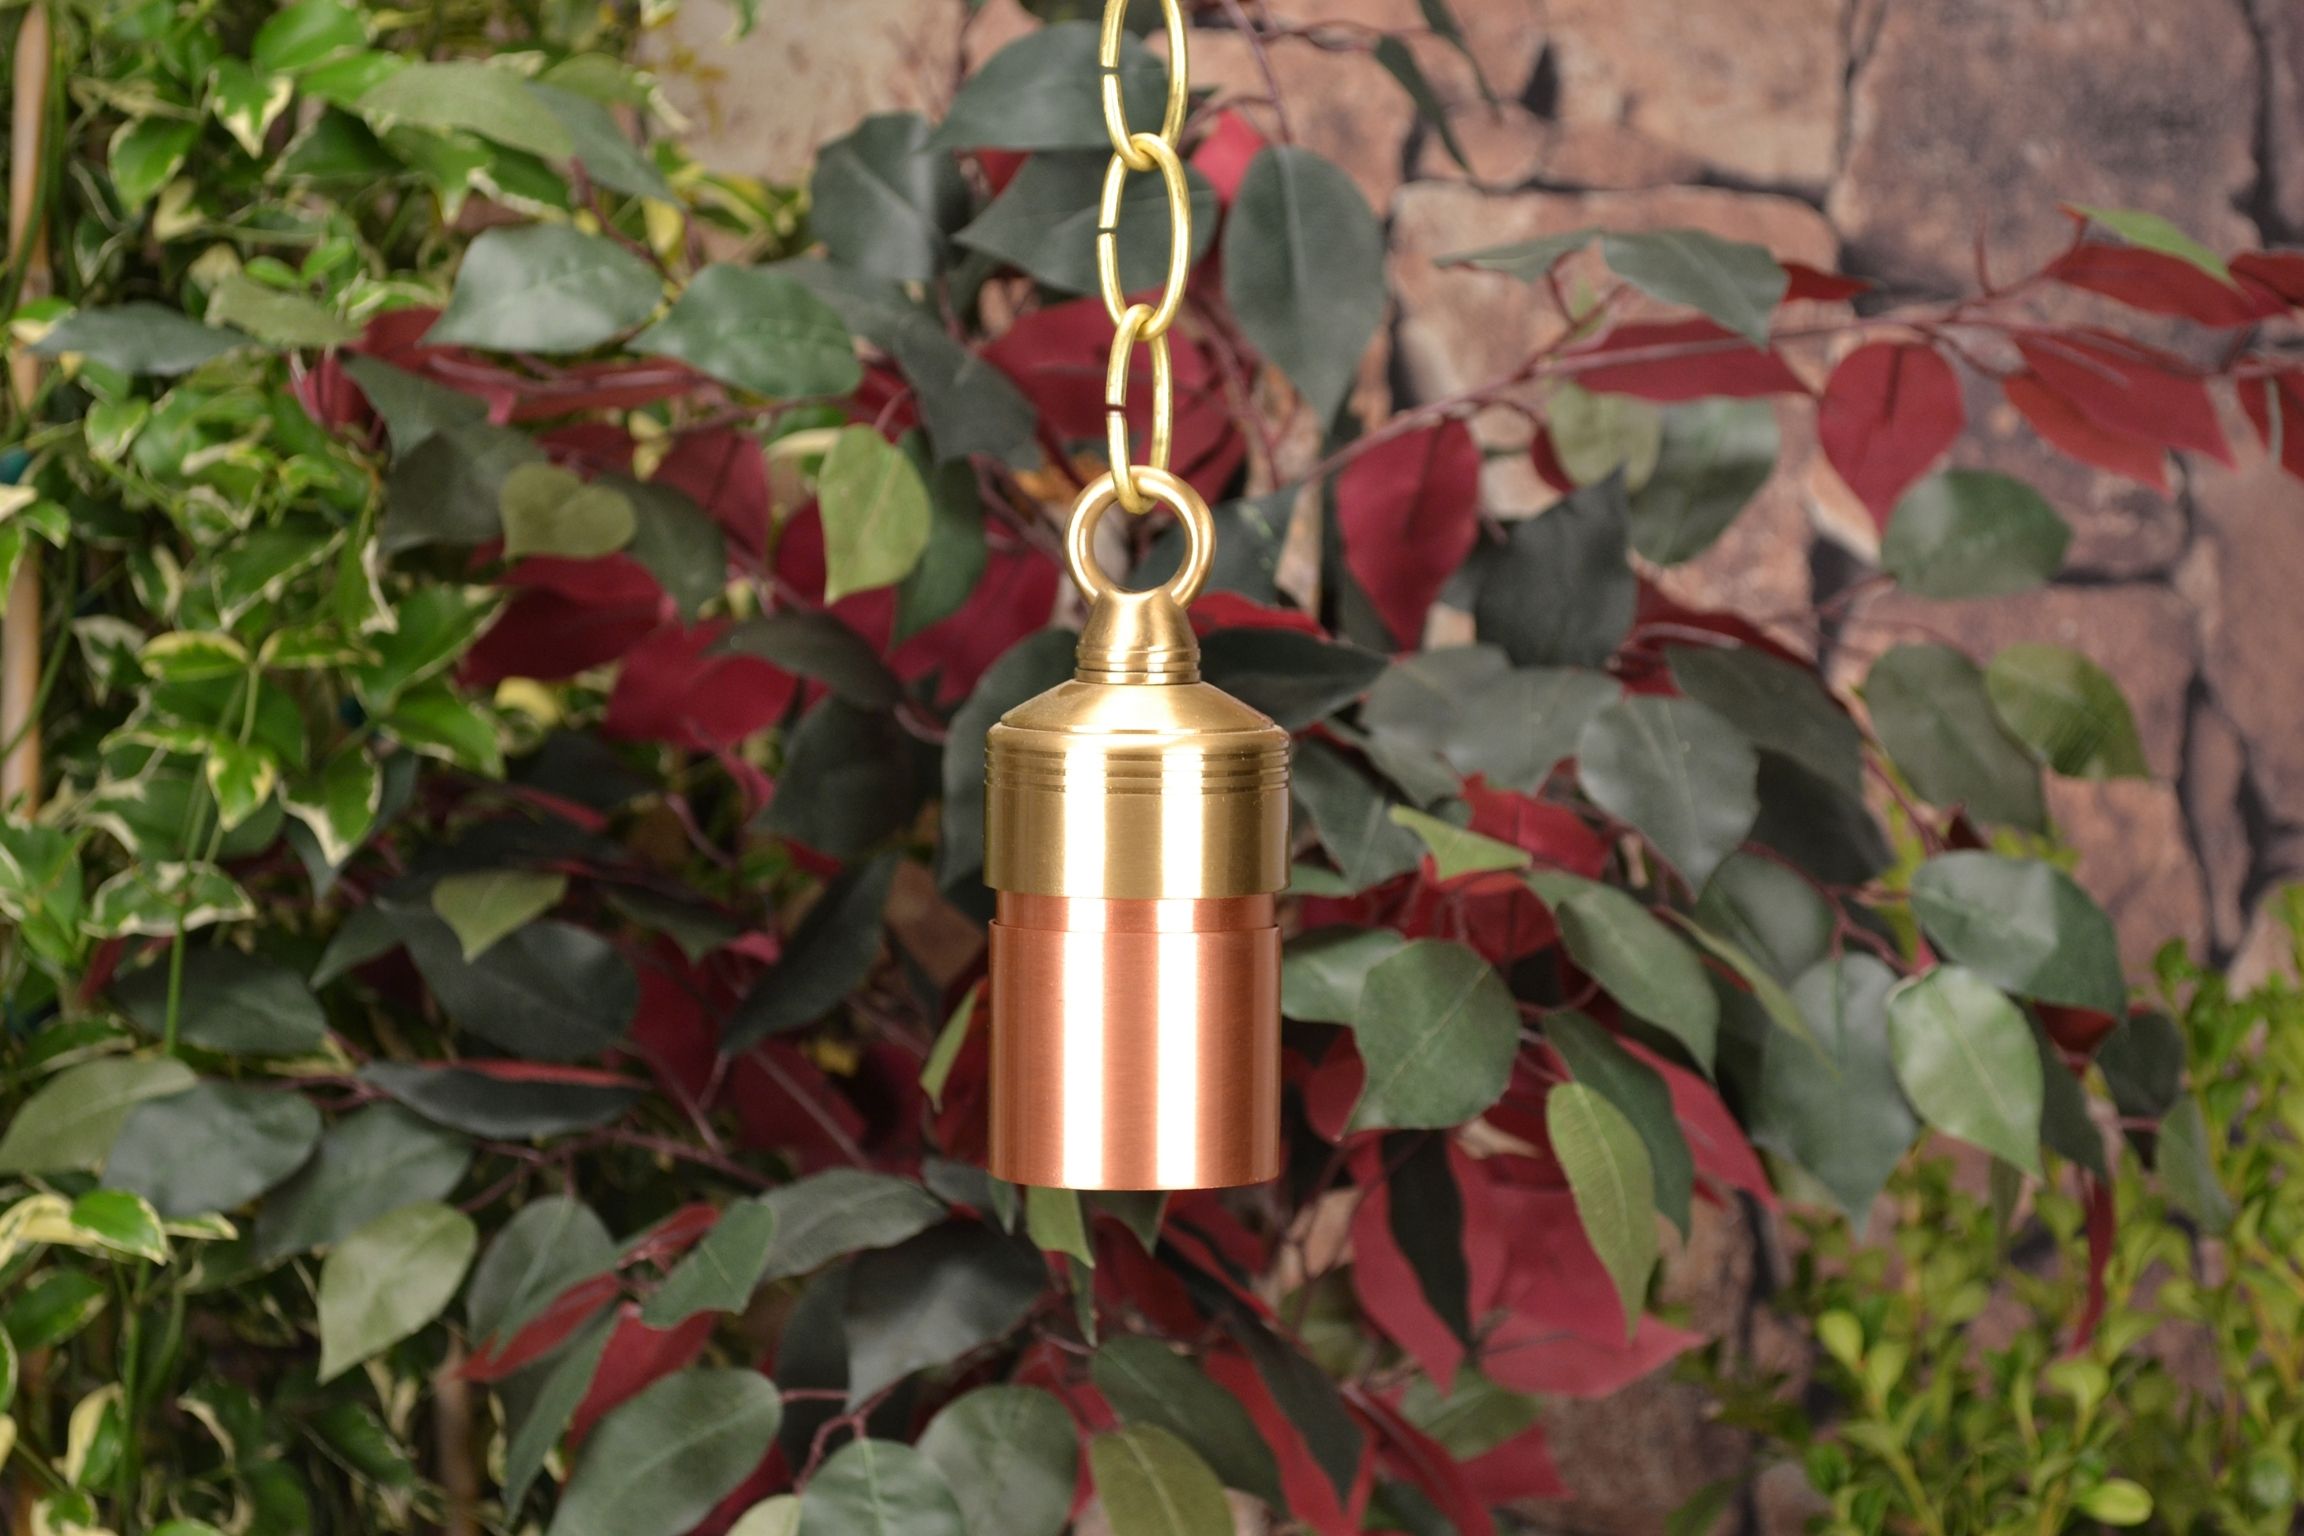 Lancasterunique Lighting Systems 12 Volt Copper Hanging Niche Pertaining To 12 Volt Outdoor Hanging Lights (View 4 of 15)